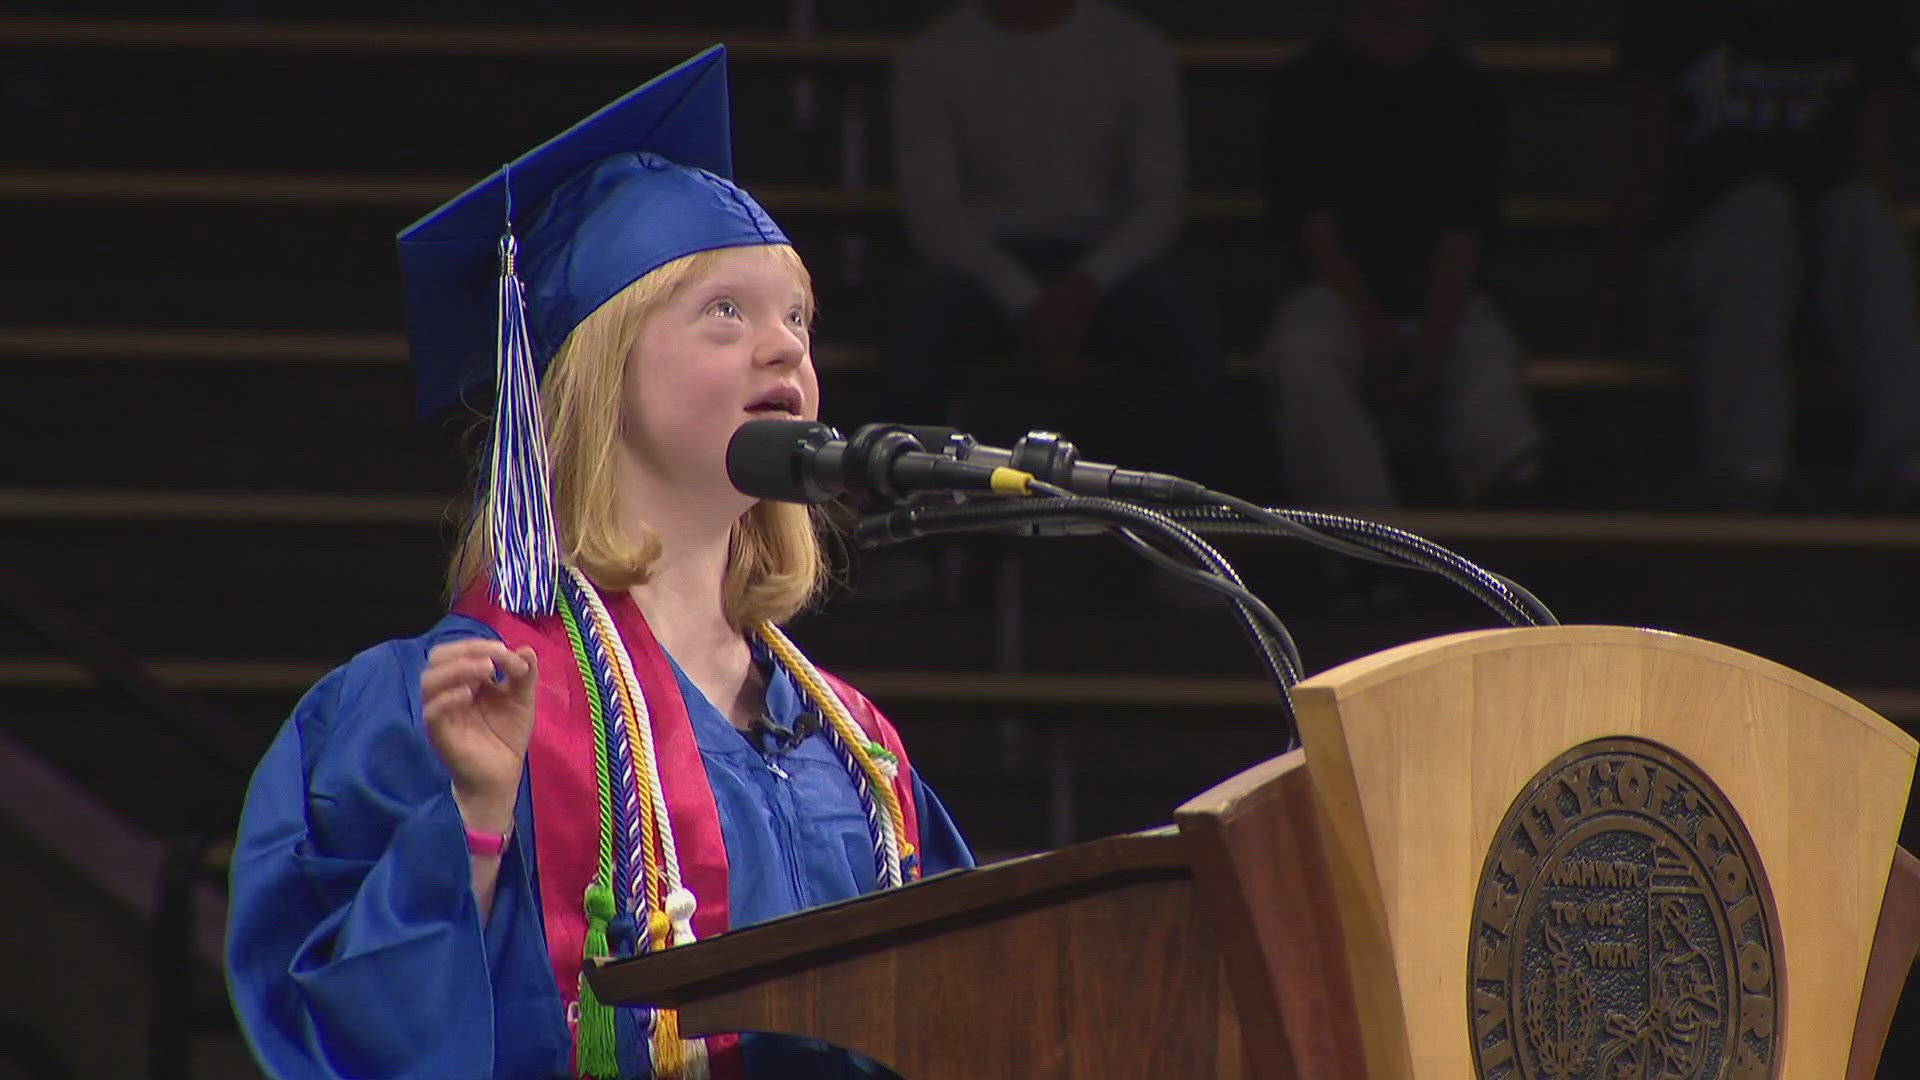 Jillian Ball made school history as the first person with Down syndrome to receive the honor.